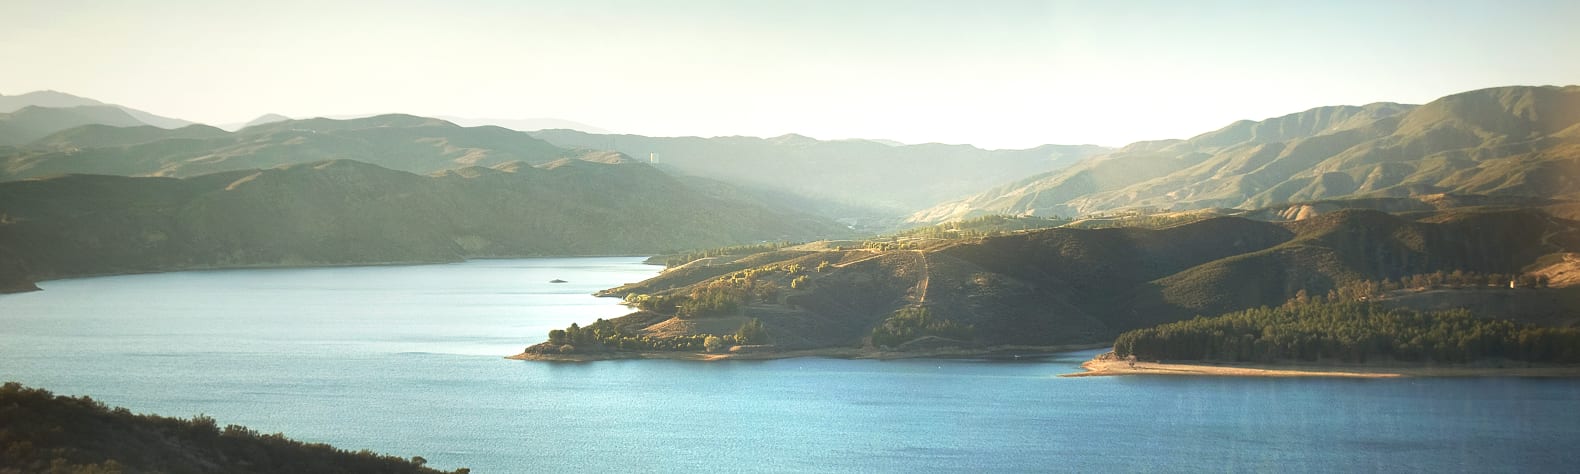 Castaic Lake State Recreation Area